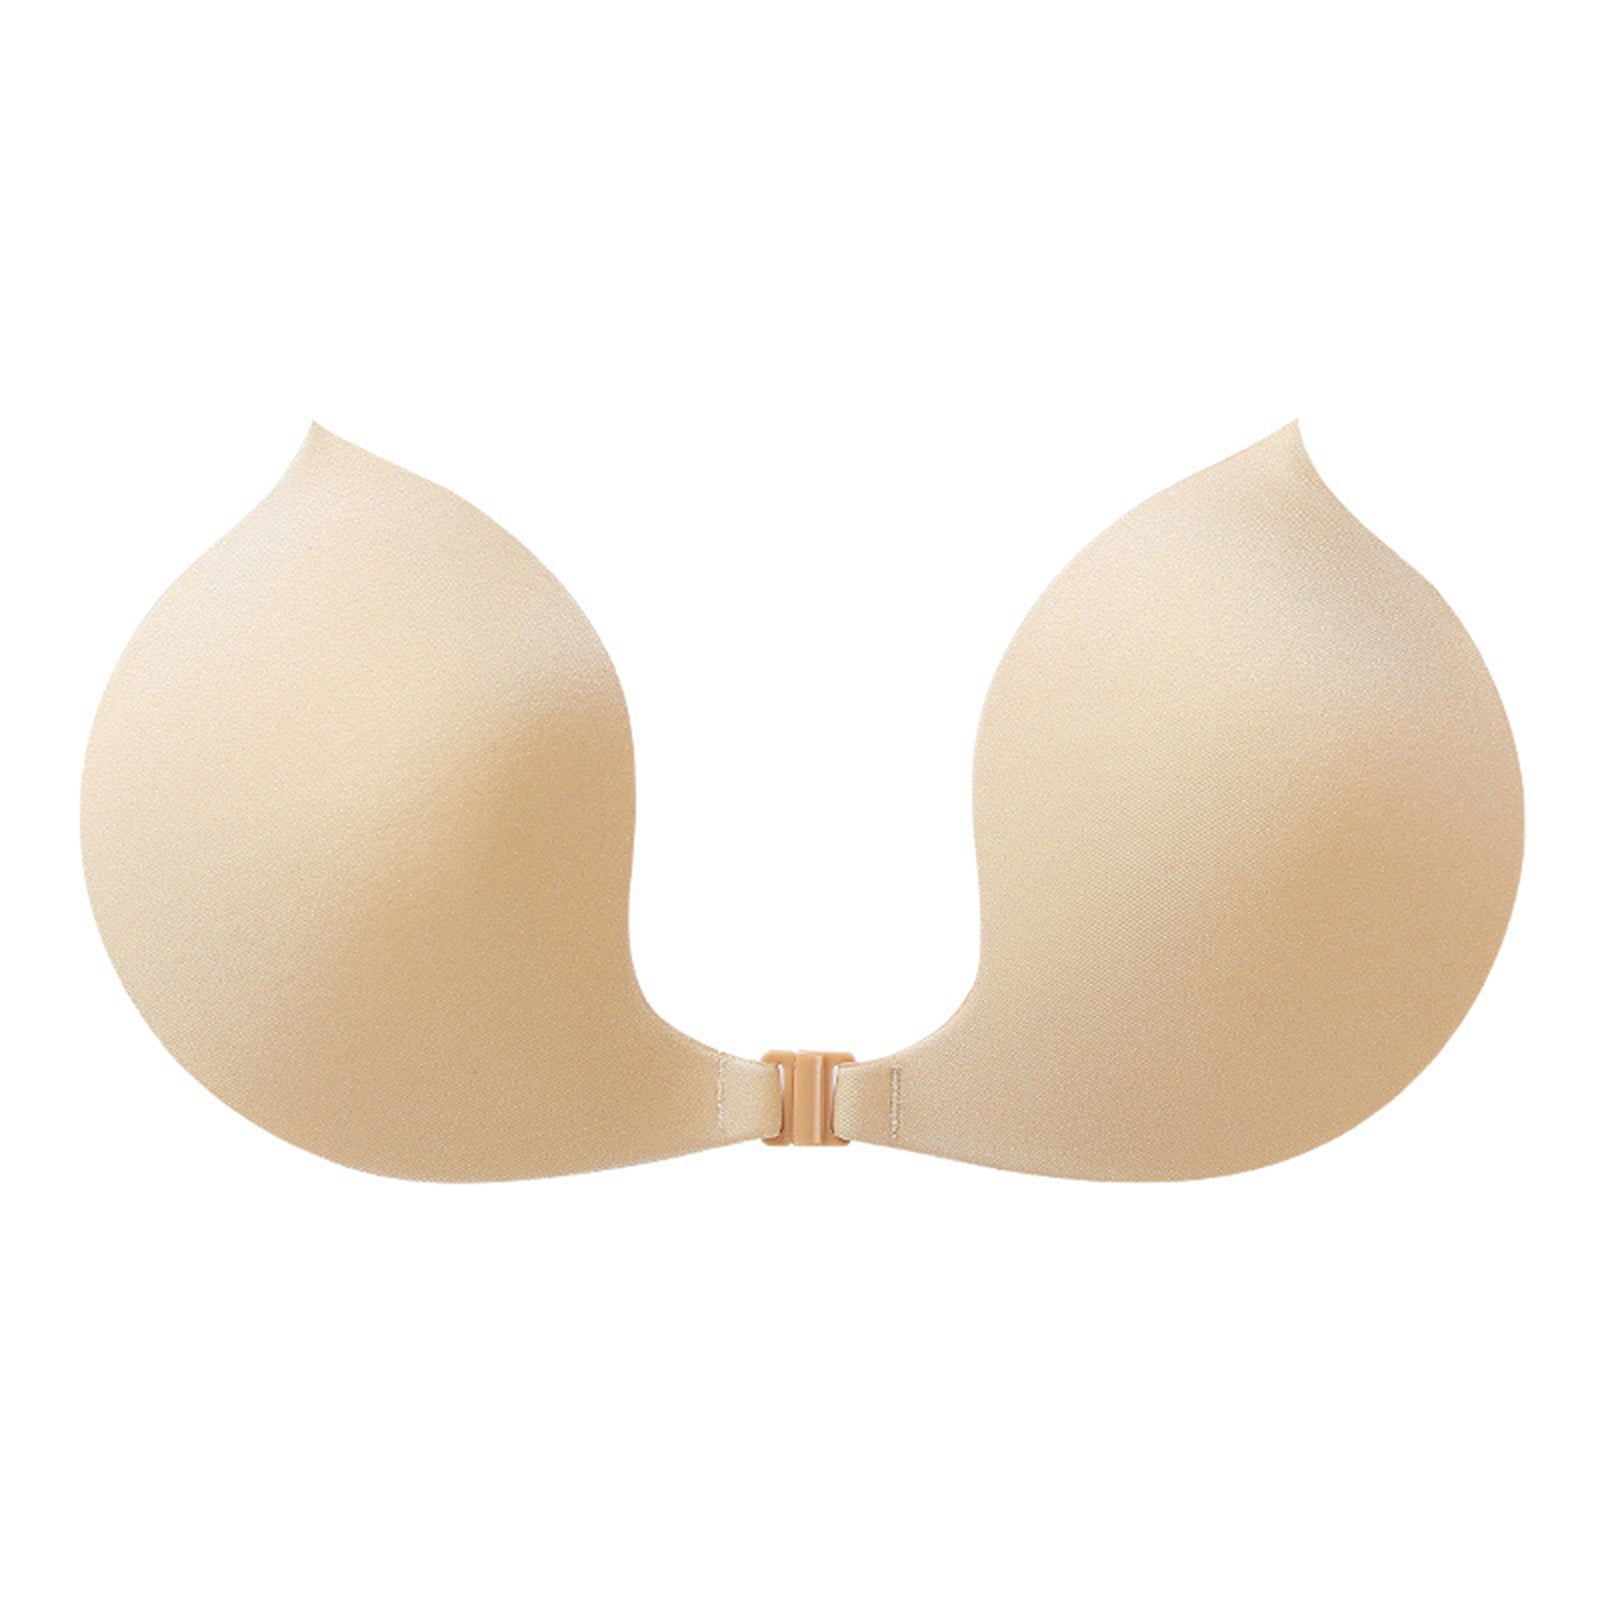 Women Invisible Lift Sticky Bra Breathable Strapless Front Button Bra  Adhesive Push Up Silicone Bras For Wedding Party Backless Dress Support  Sports